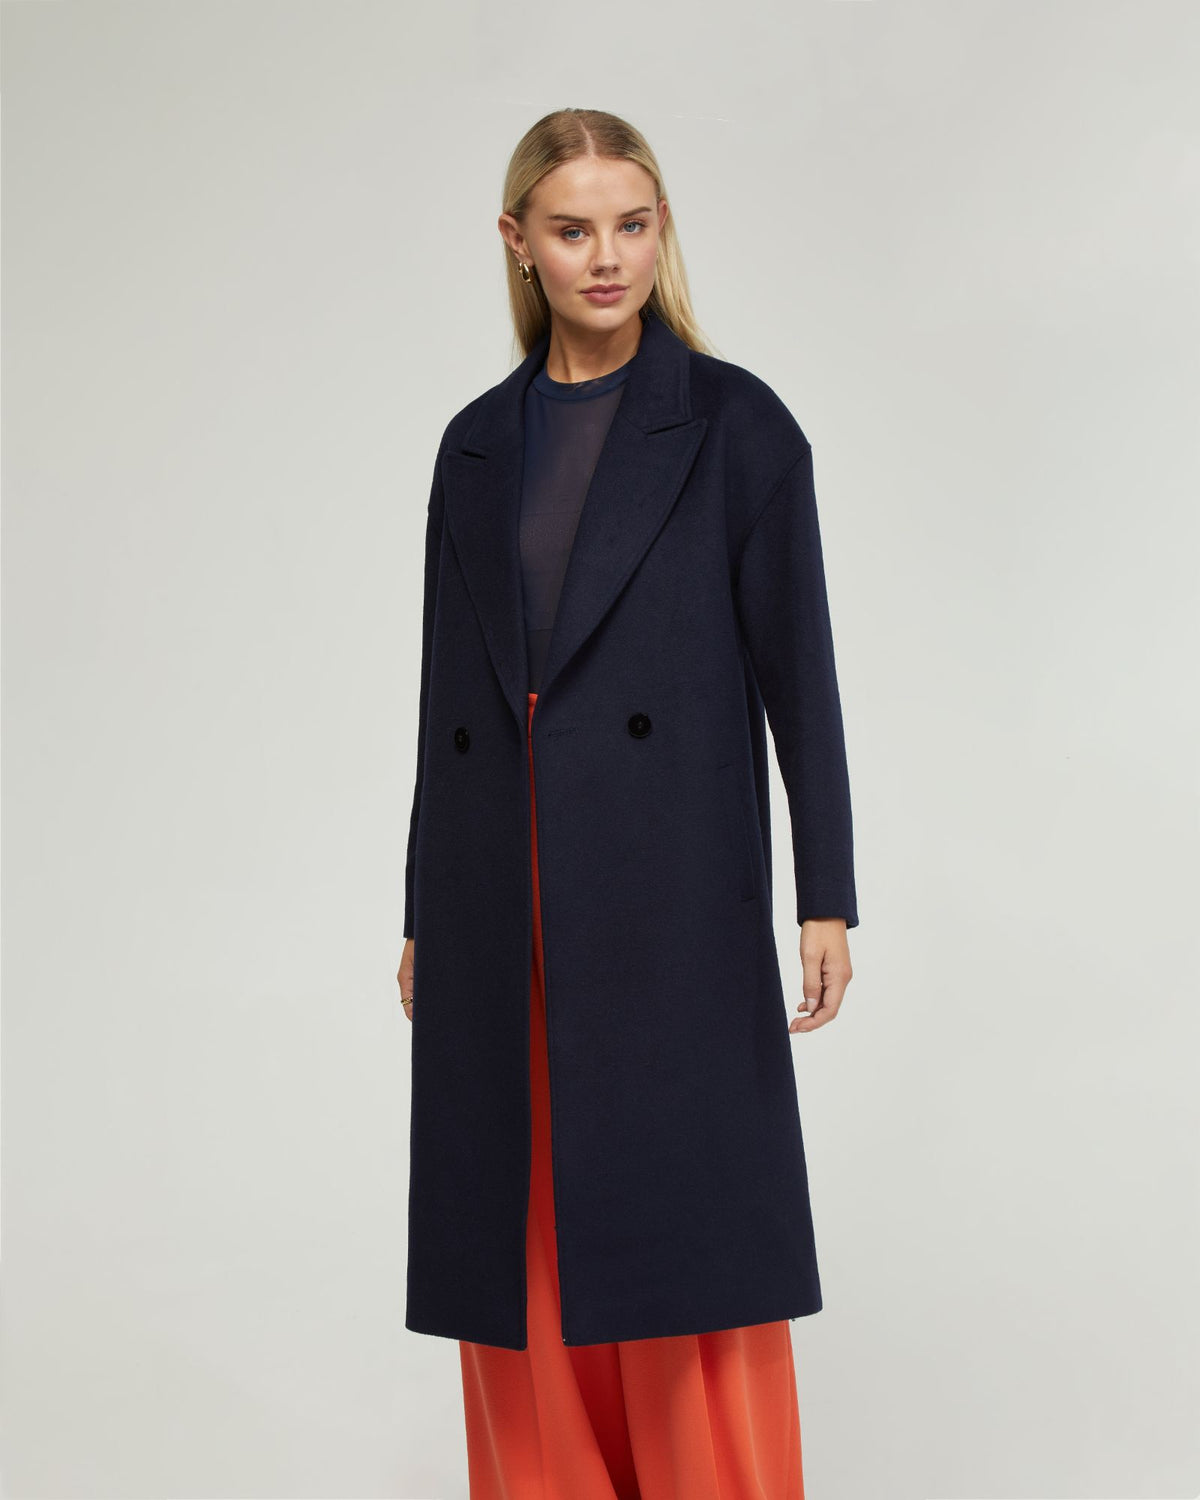 CELIA WOOL RICH HALF LINED COAT - AVAILABLE ~ 1-2 weeks WOMENS SUITS JKTS COATS